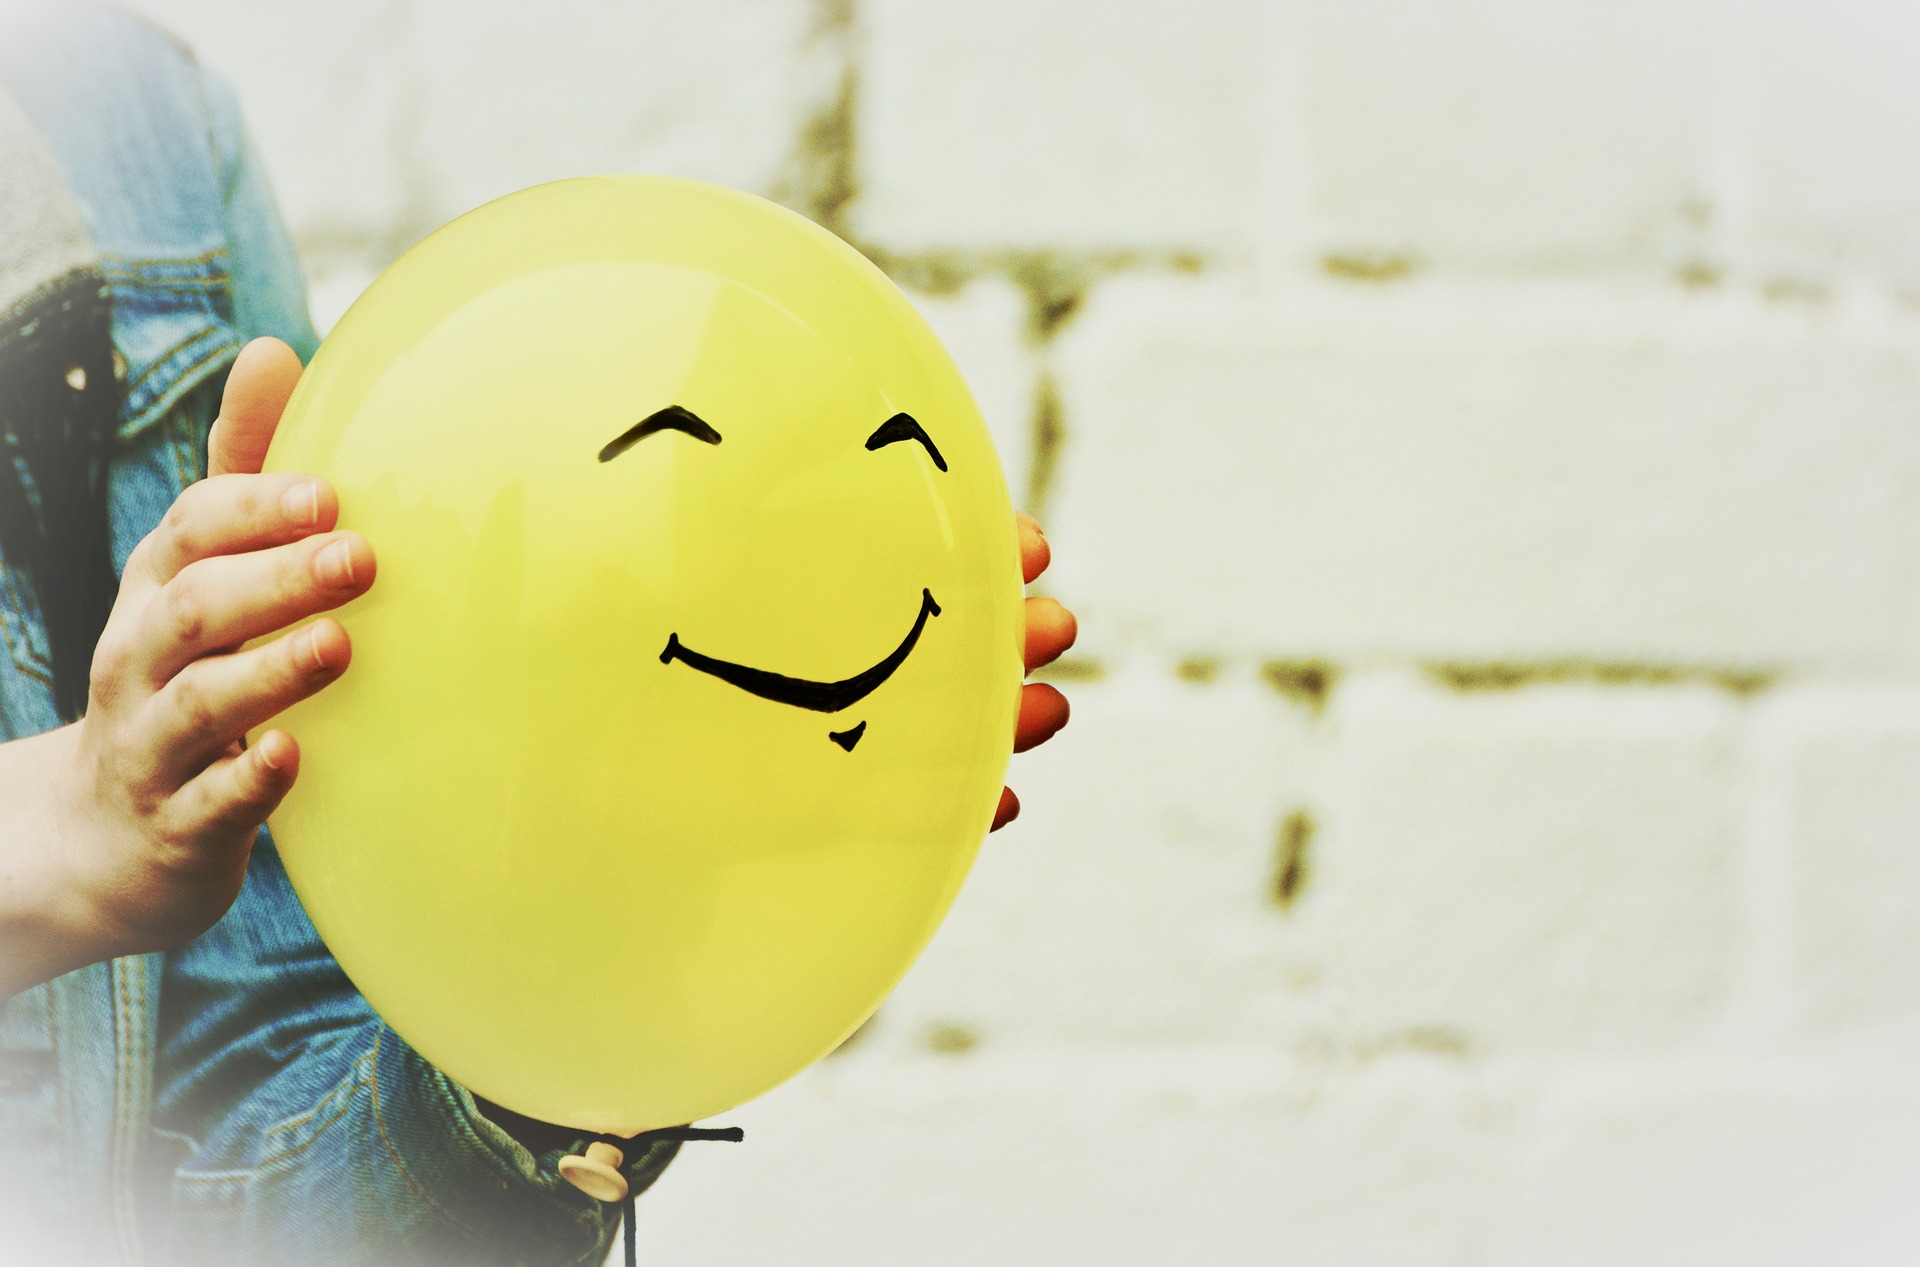 Hands holding yellow smiling balloon.